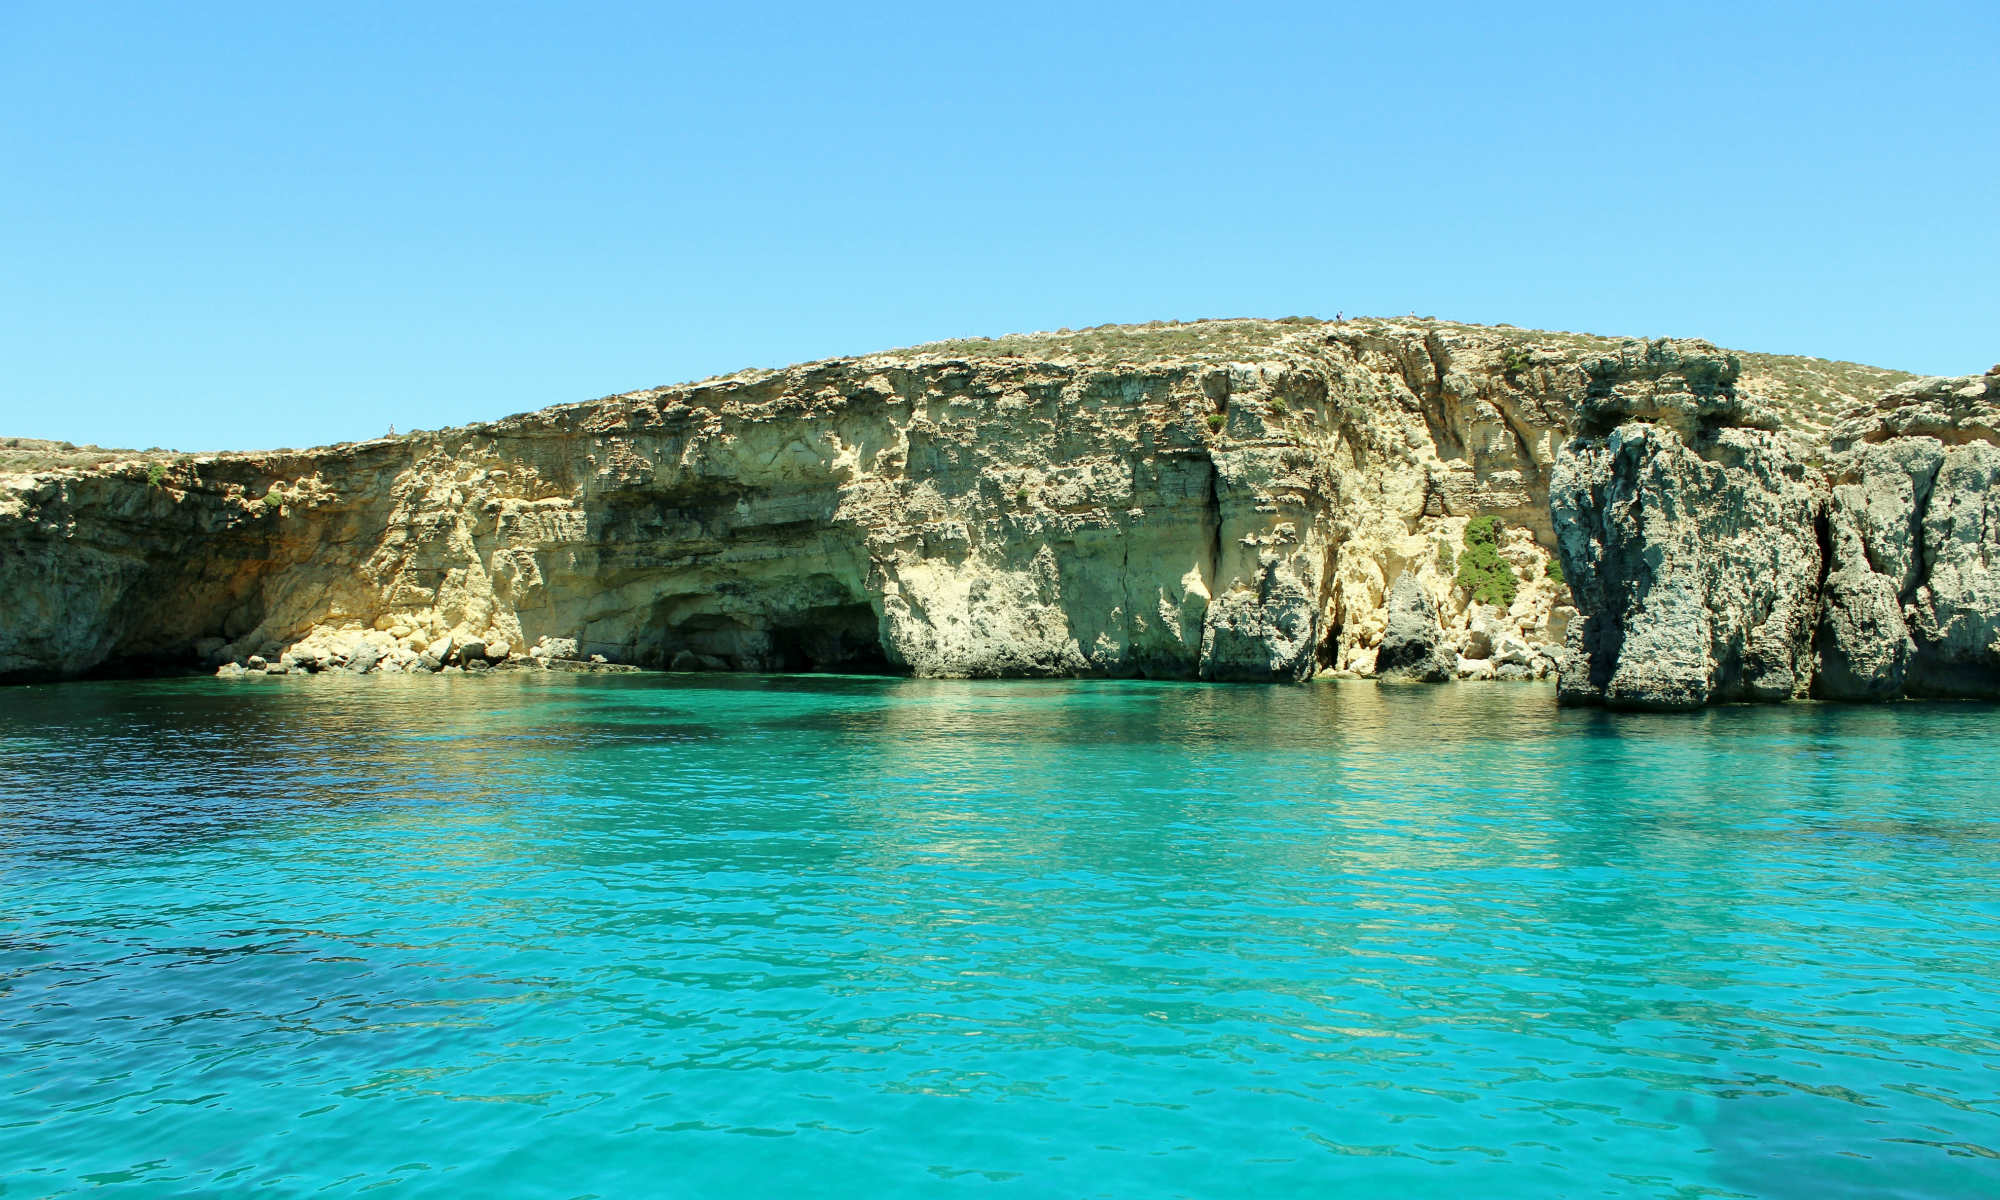 A beautiful lagoon where the turquoise waters of the Mediterranean meet Gozo’s cliff edges.